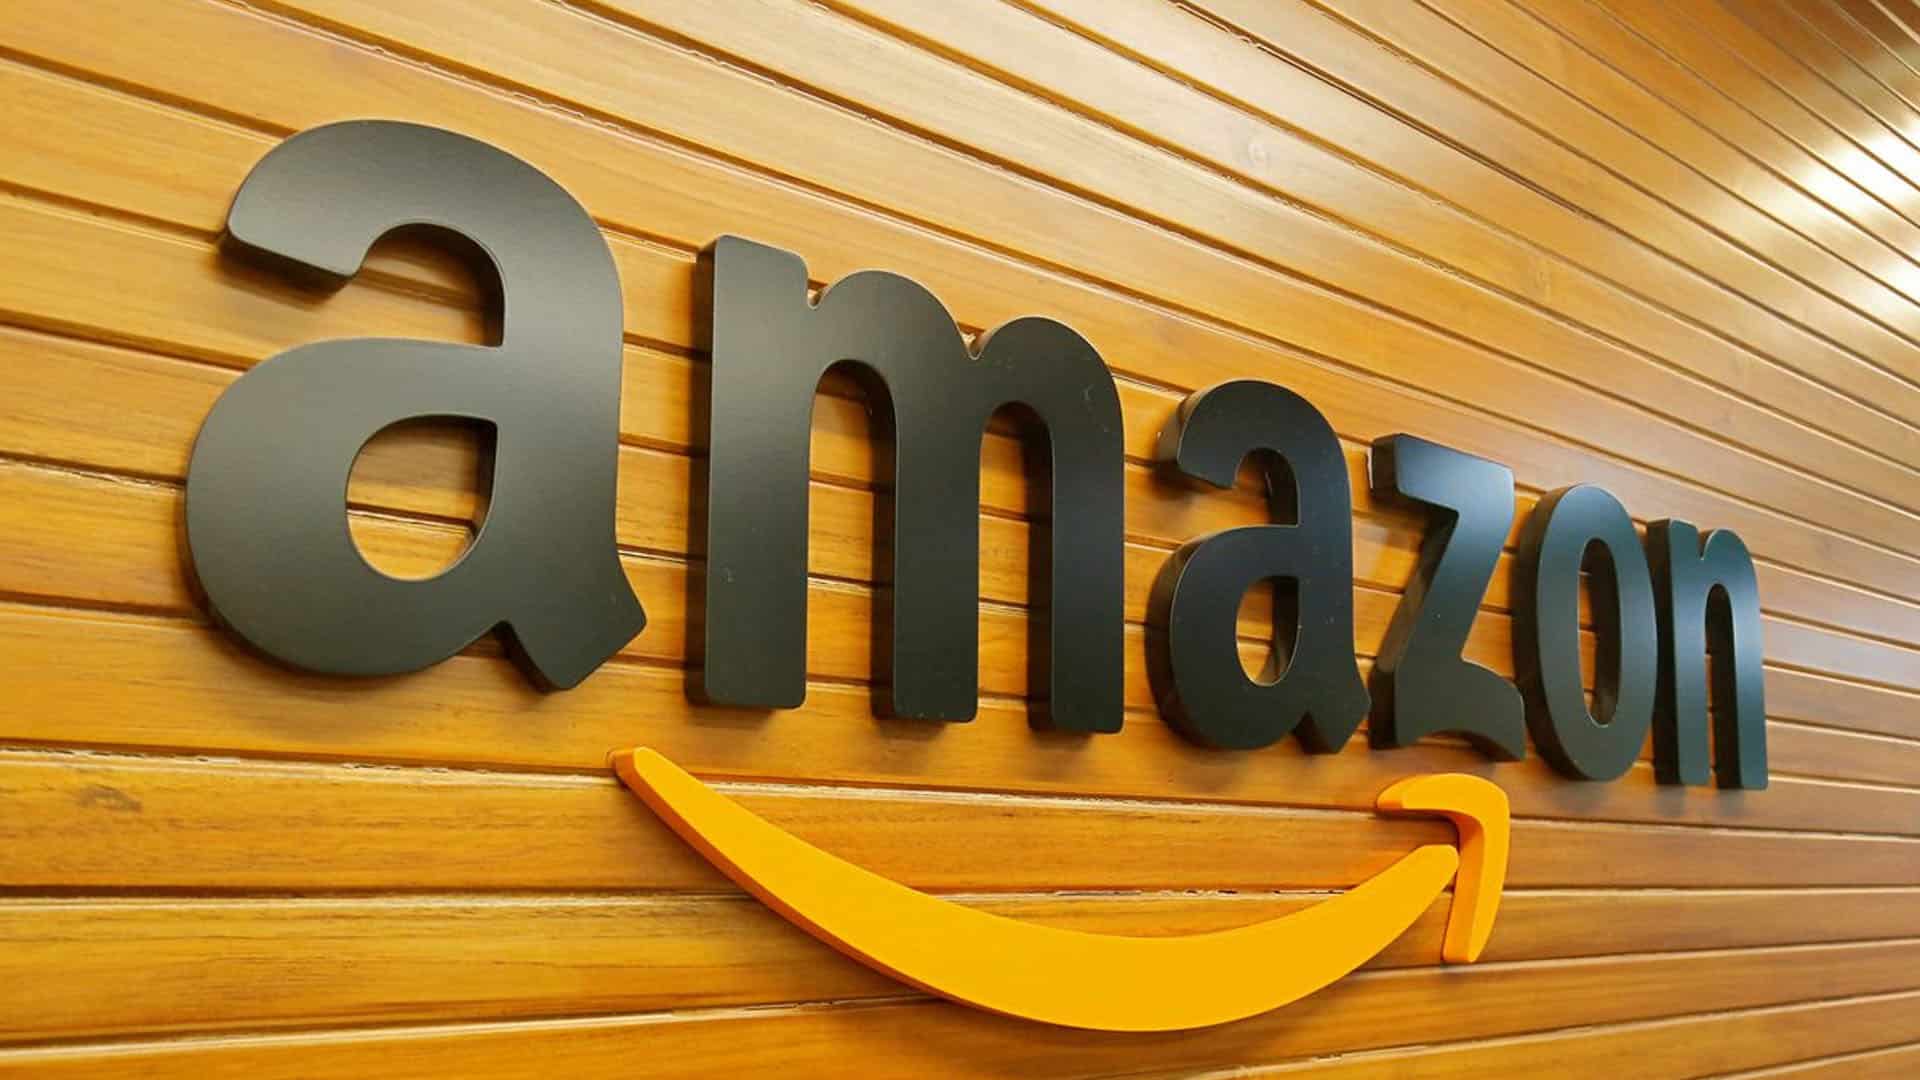 Amazon Business records 56 per cent YoY growth during Prime Day